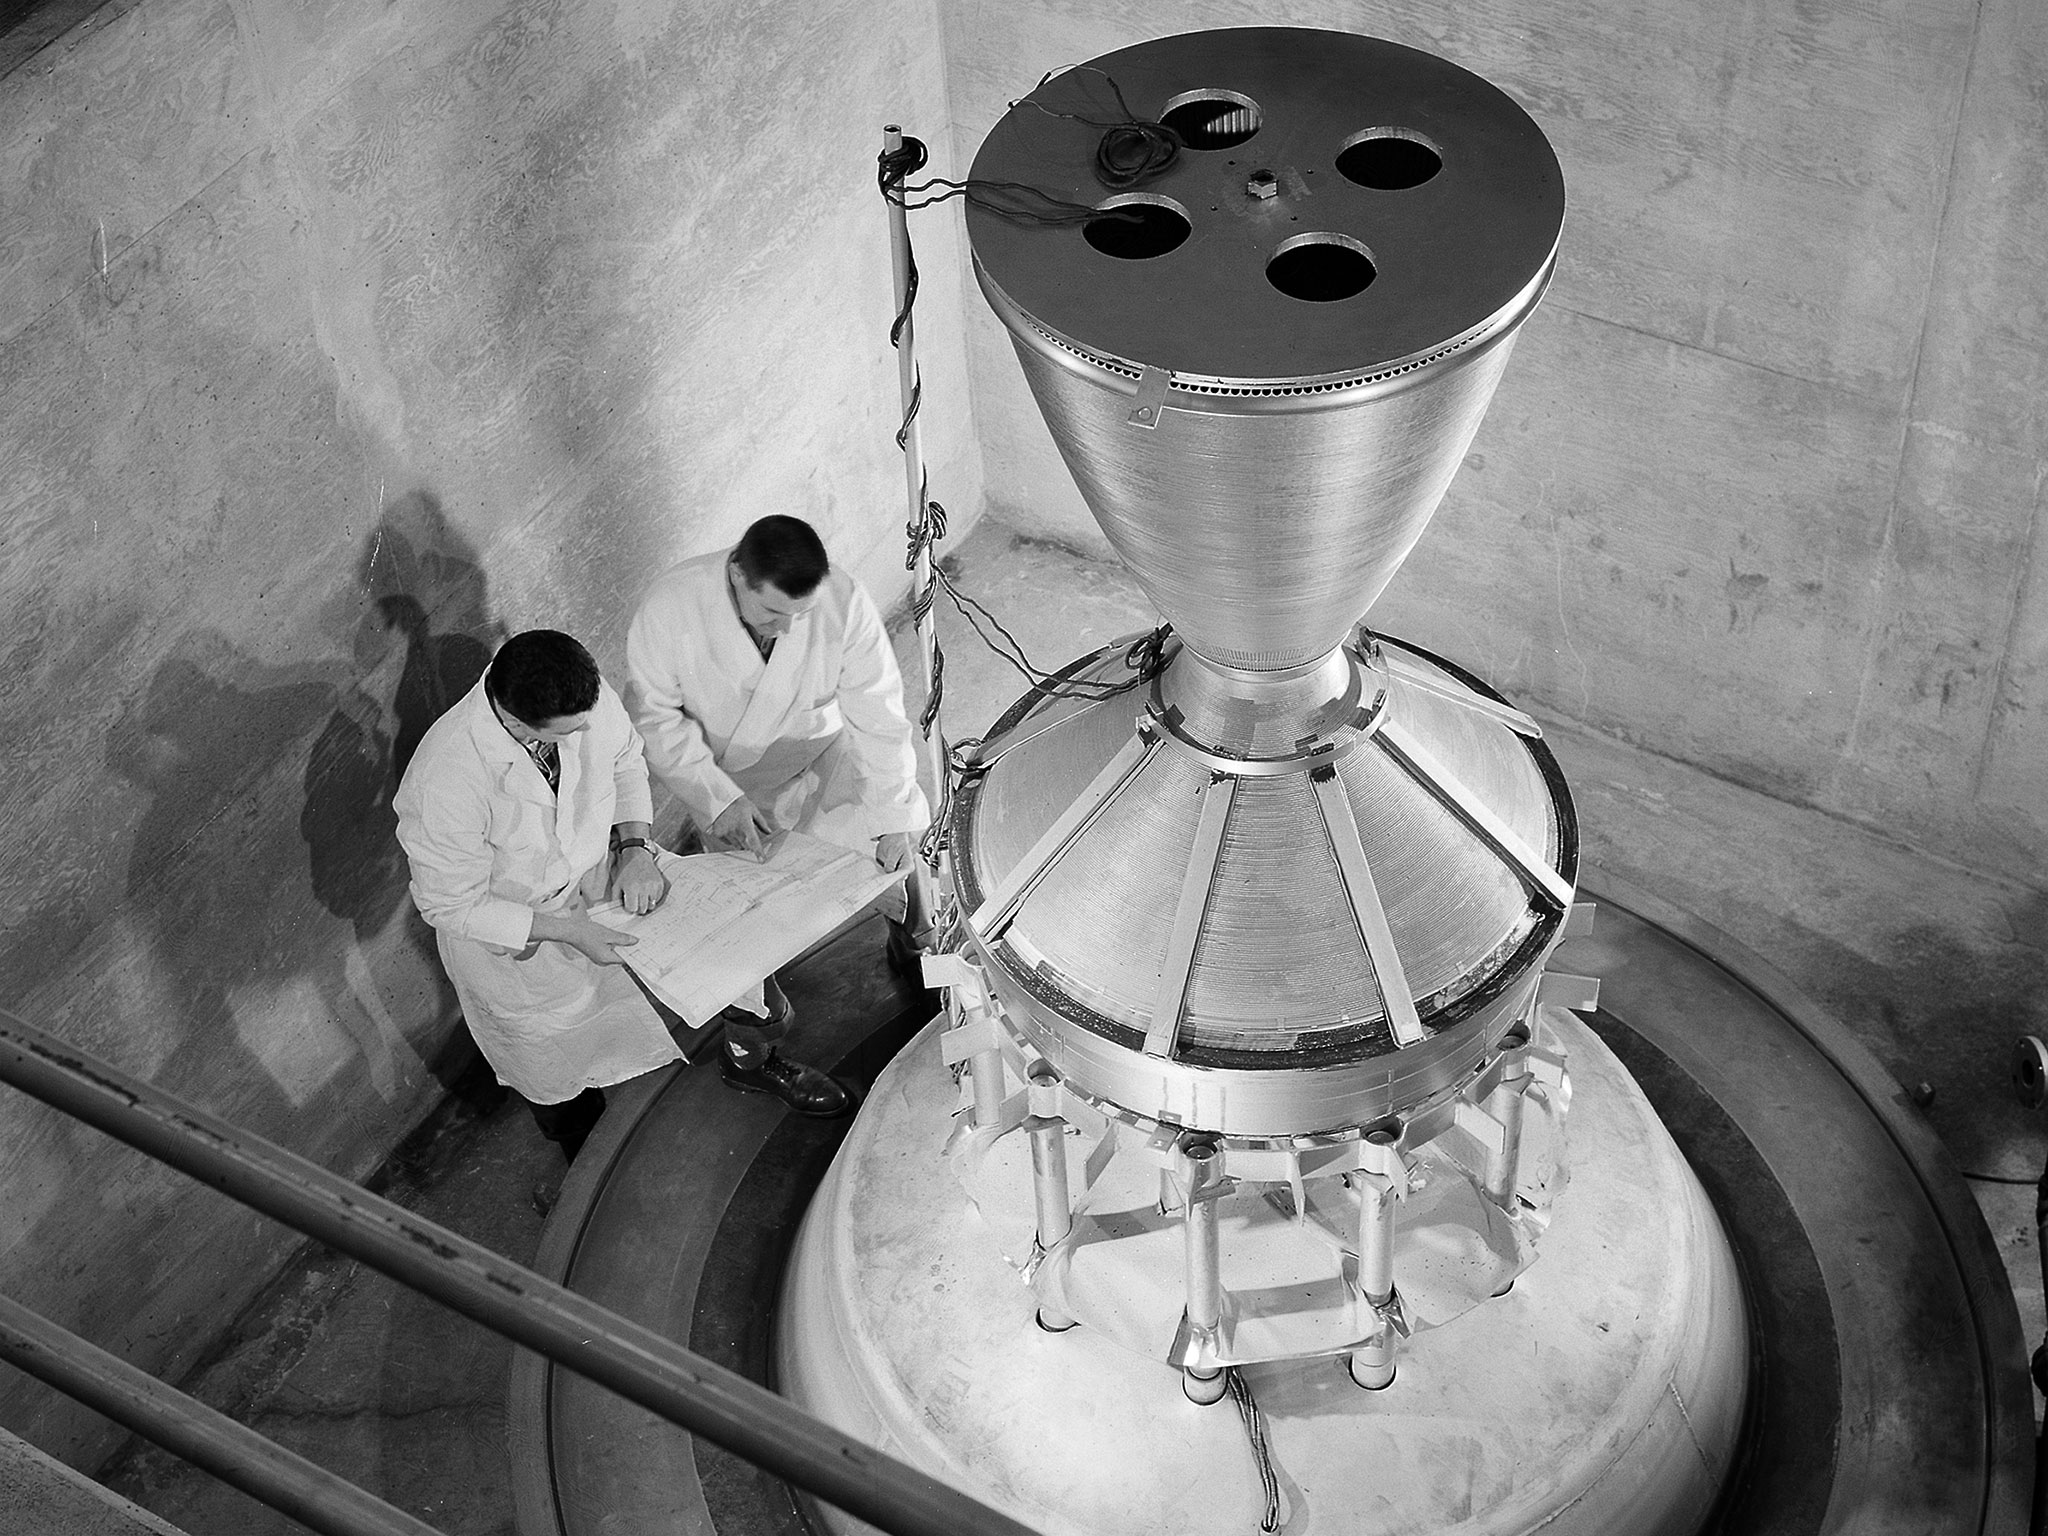 Two engineers in lab coats reviewing test results next to a large engine.